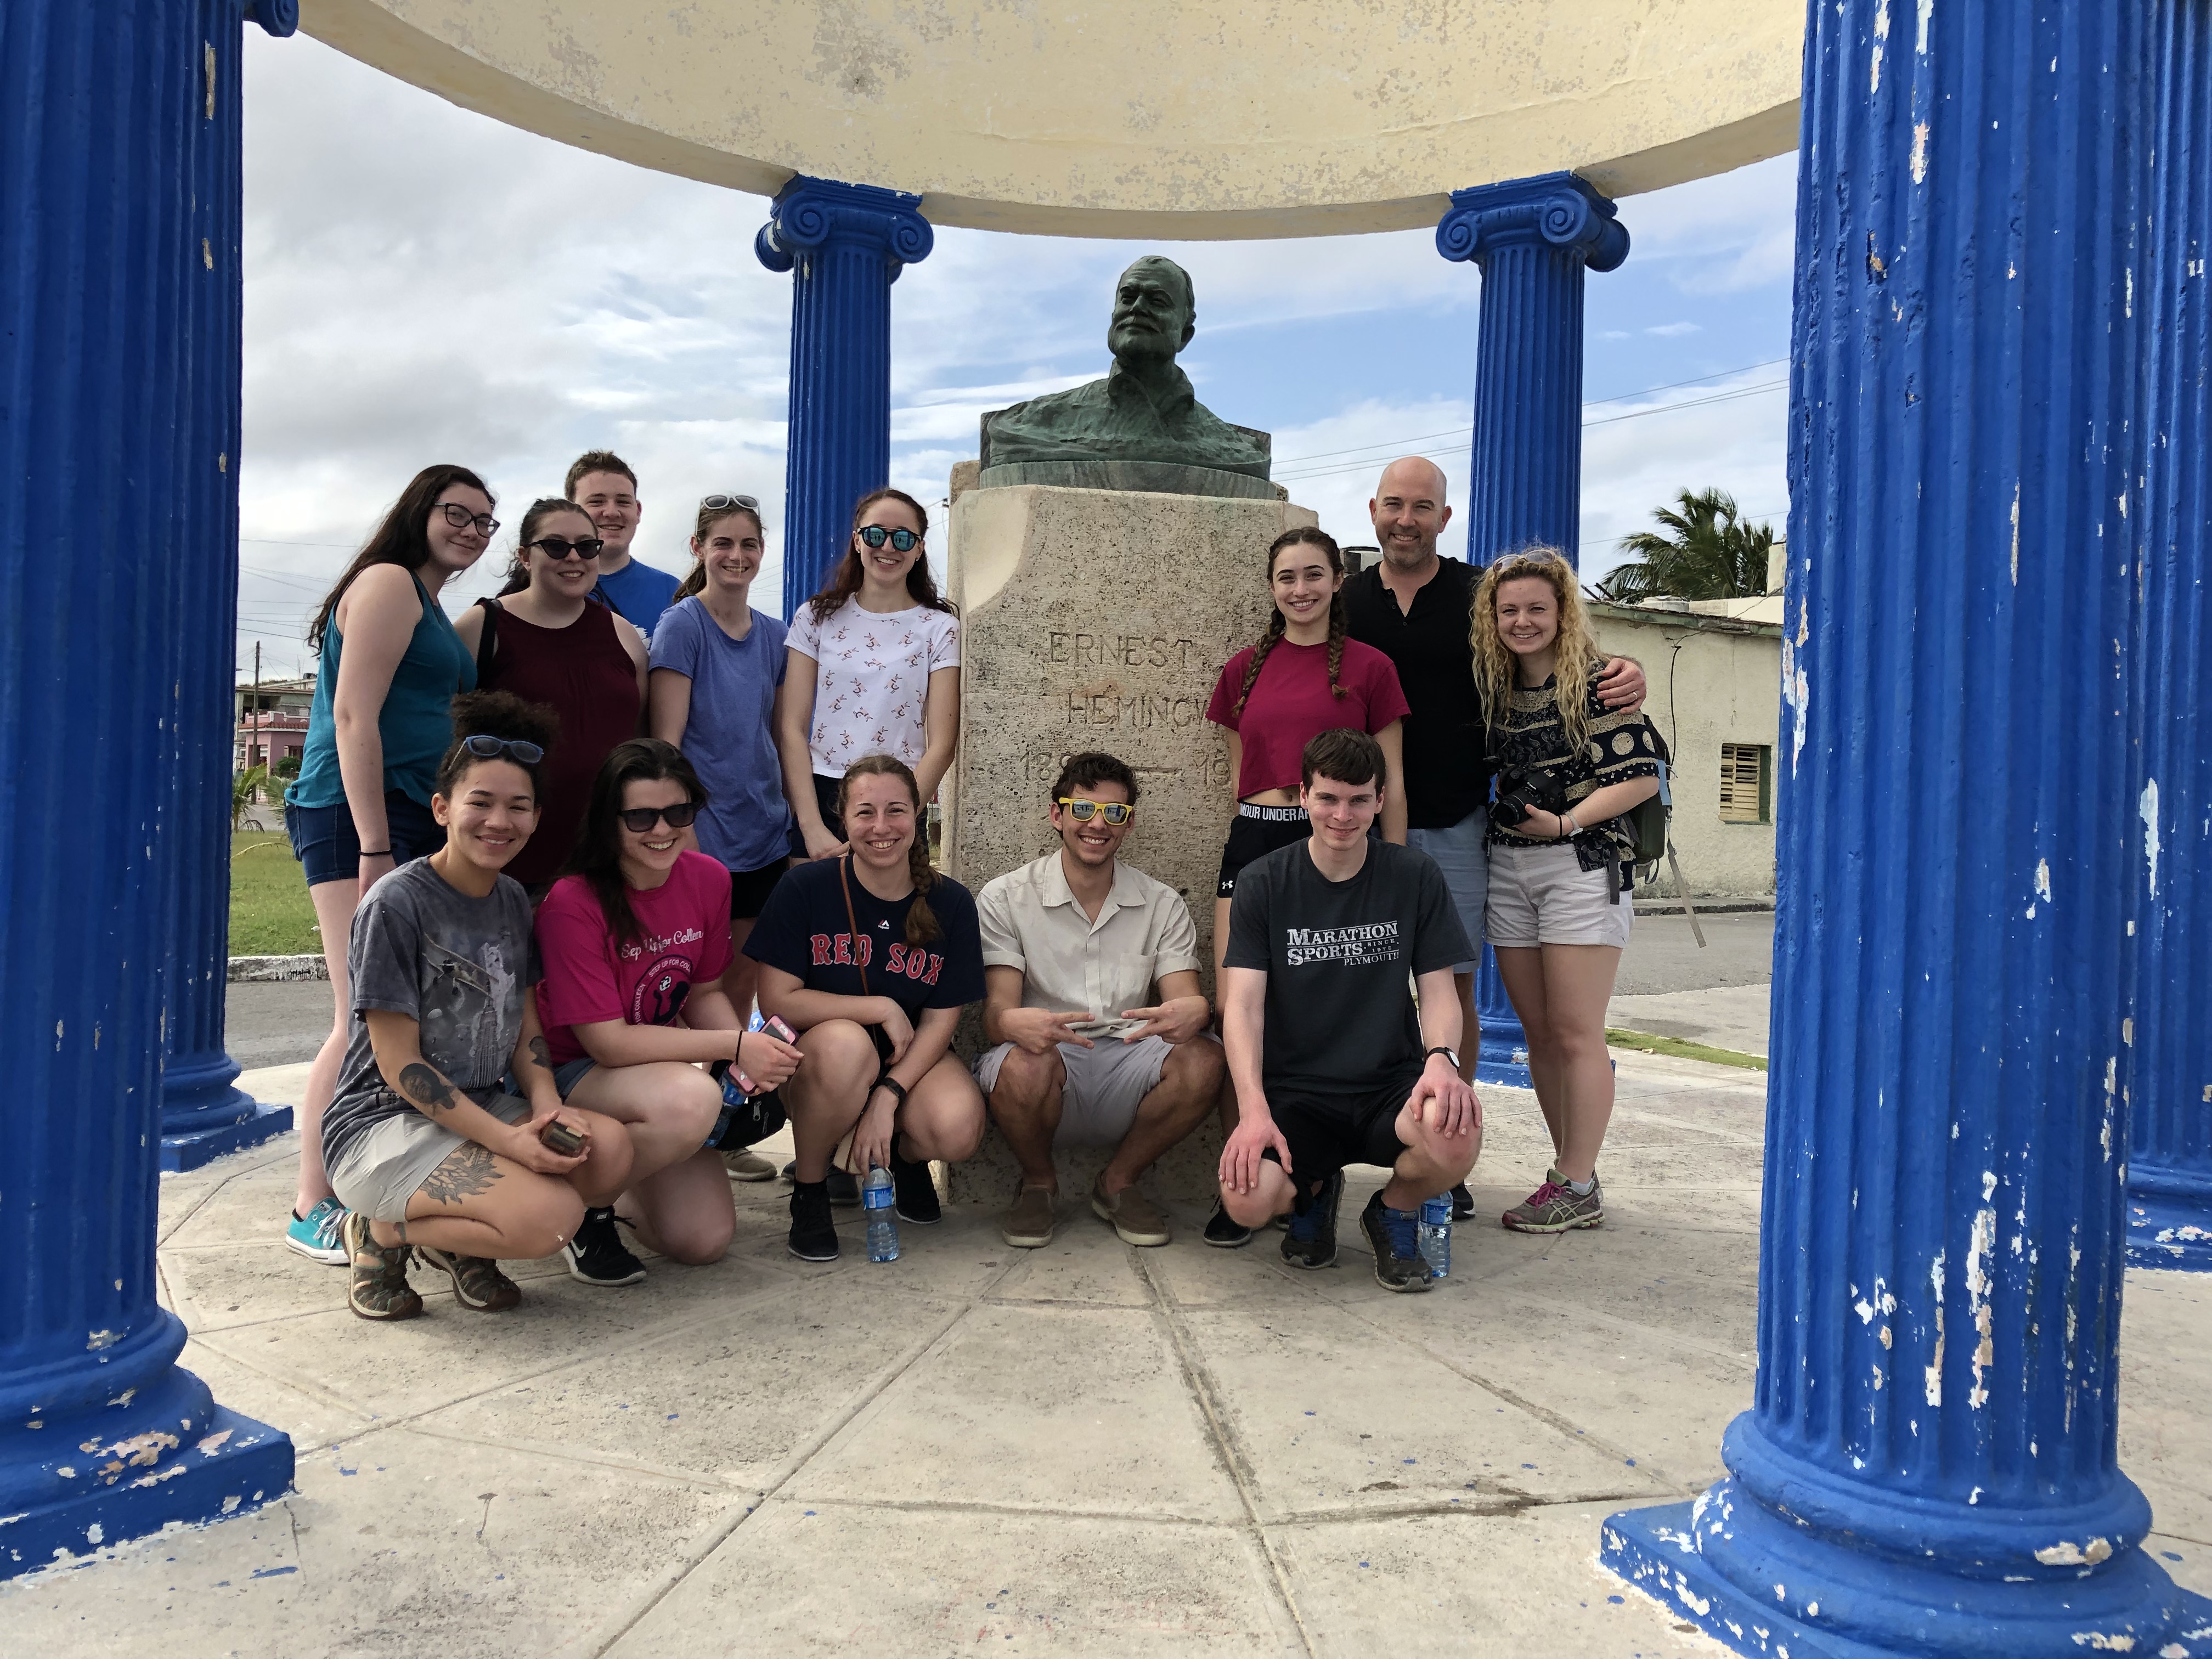 Honors students stand before a bust of Ernest Hemingway in the fishing town of Cojimar. It was the first bust of Hemingway in the world, constructed by the region's fishermen not long after Hemingway's death.